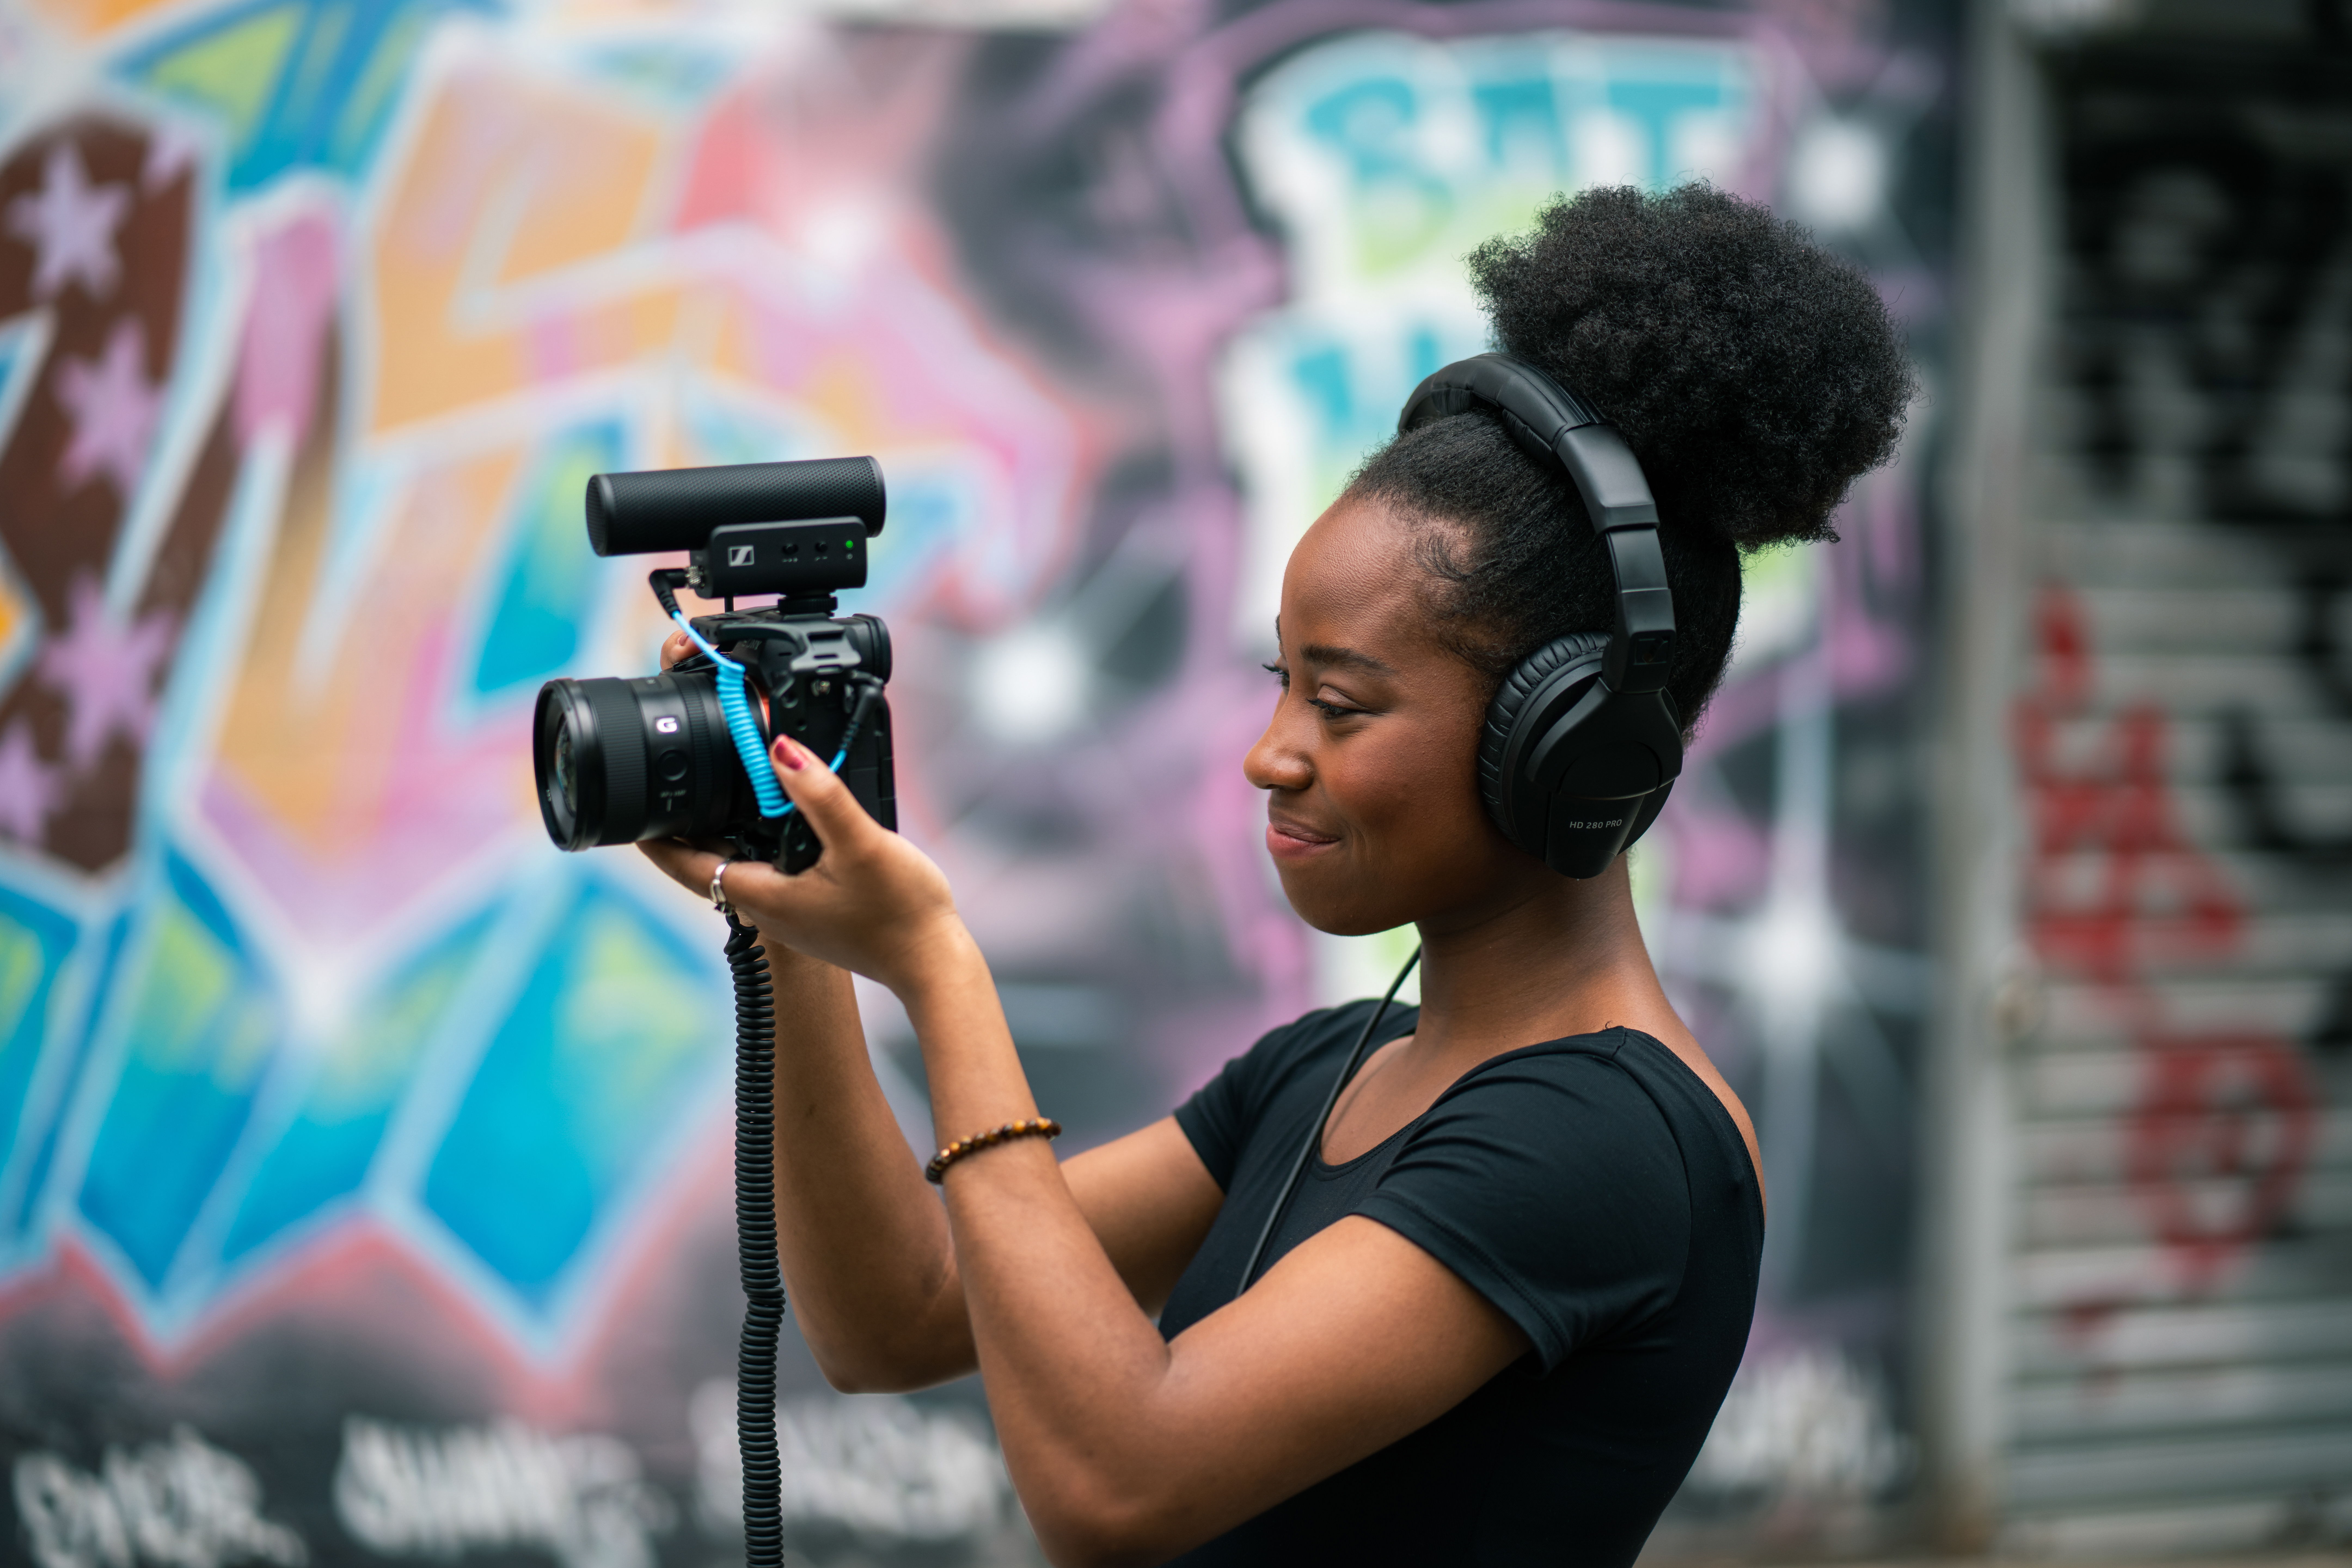 Sennheiser’s collection of camera microphones and mobile kits like the MKE 400 pictured here will be presented at the SXSW Tech and Innovation Expo.